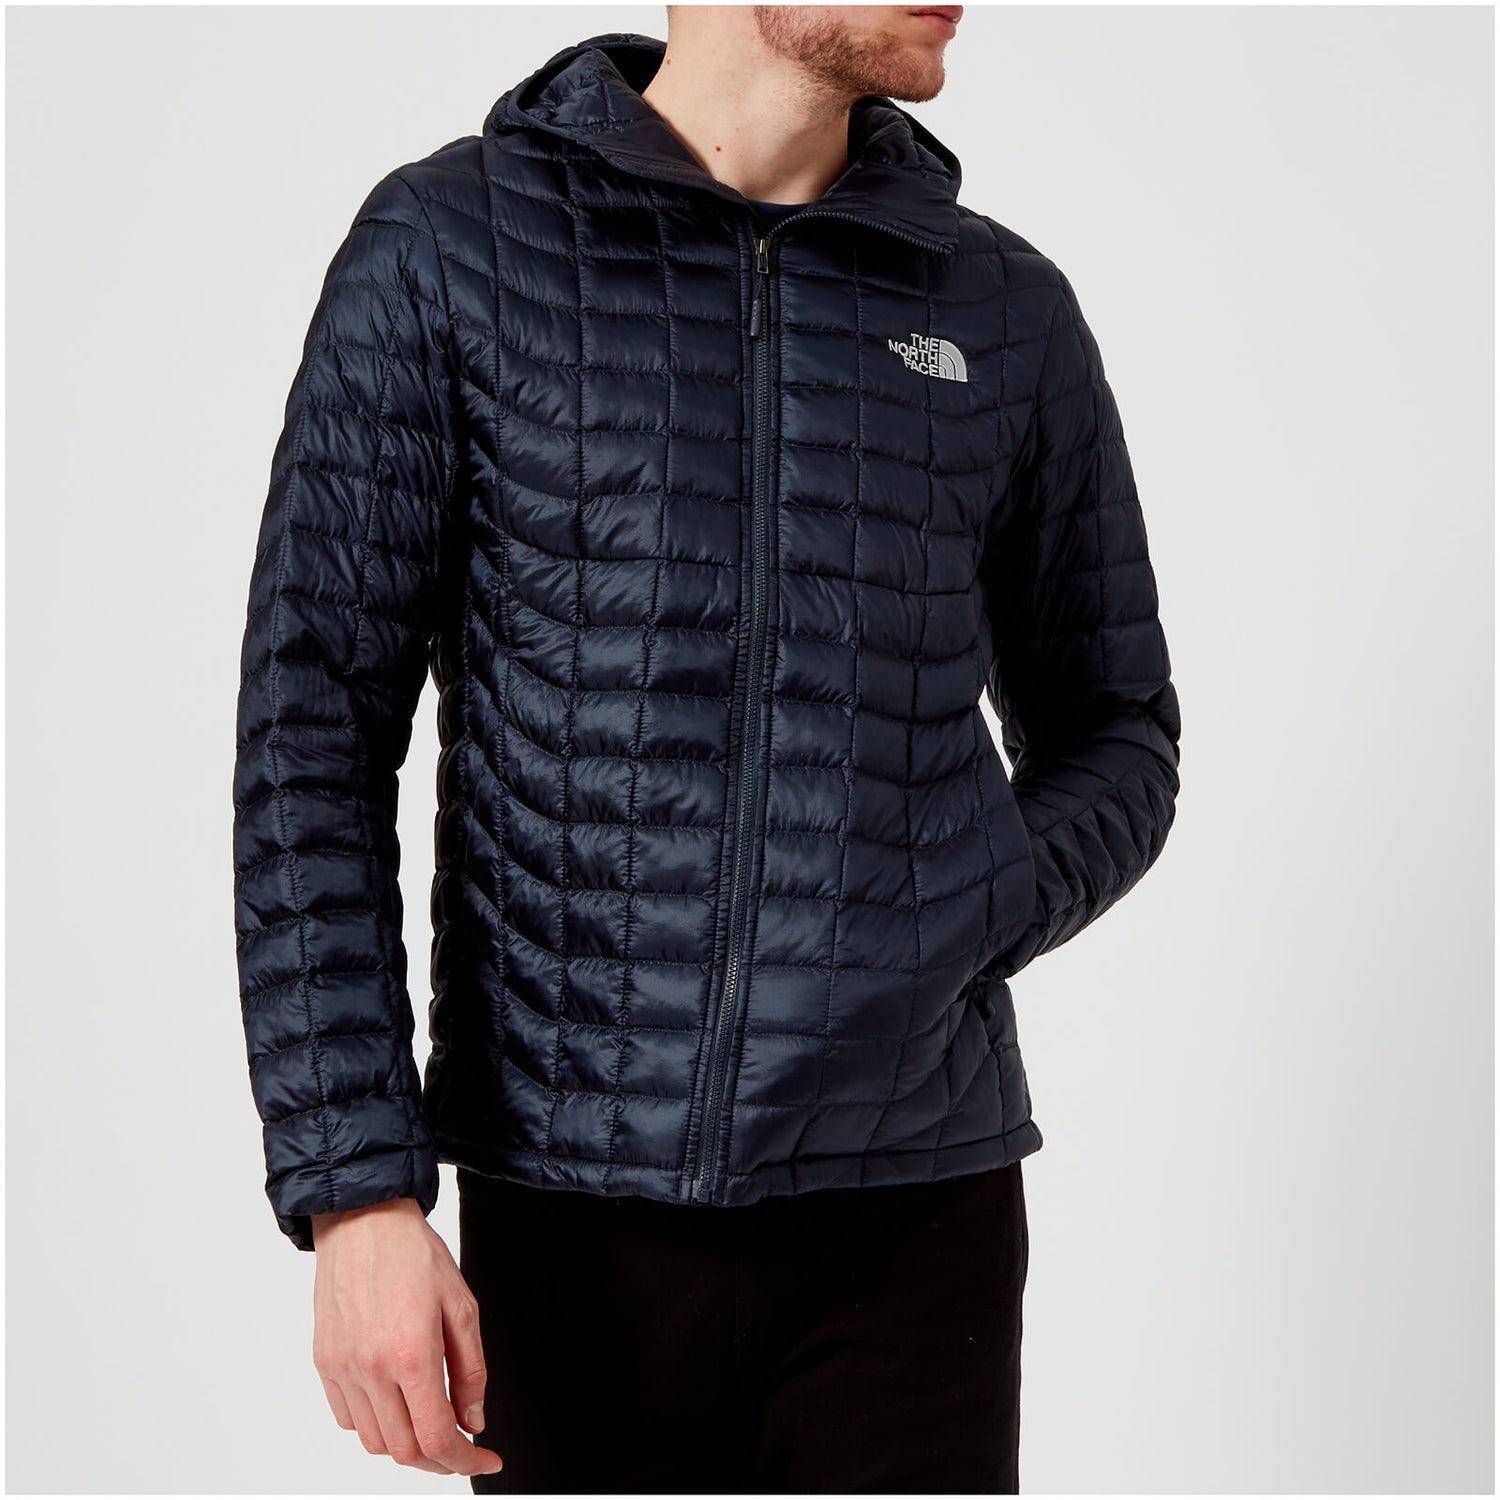 The North Face Men's Thermoball Hoodie Jacket - Urban Navy | TheHut.com